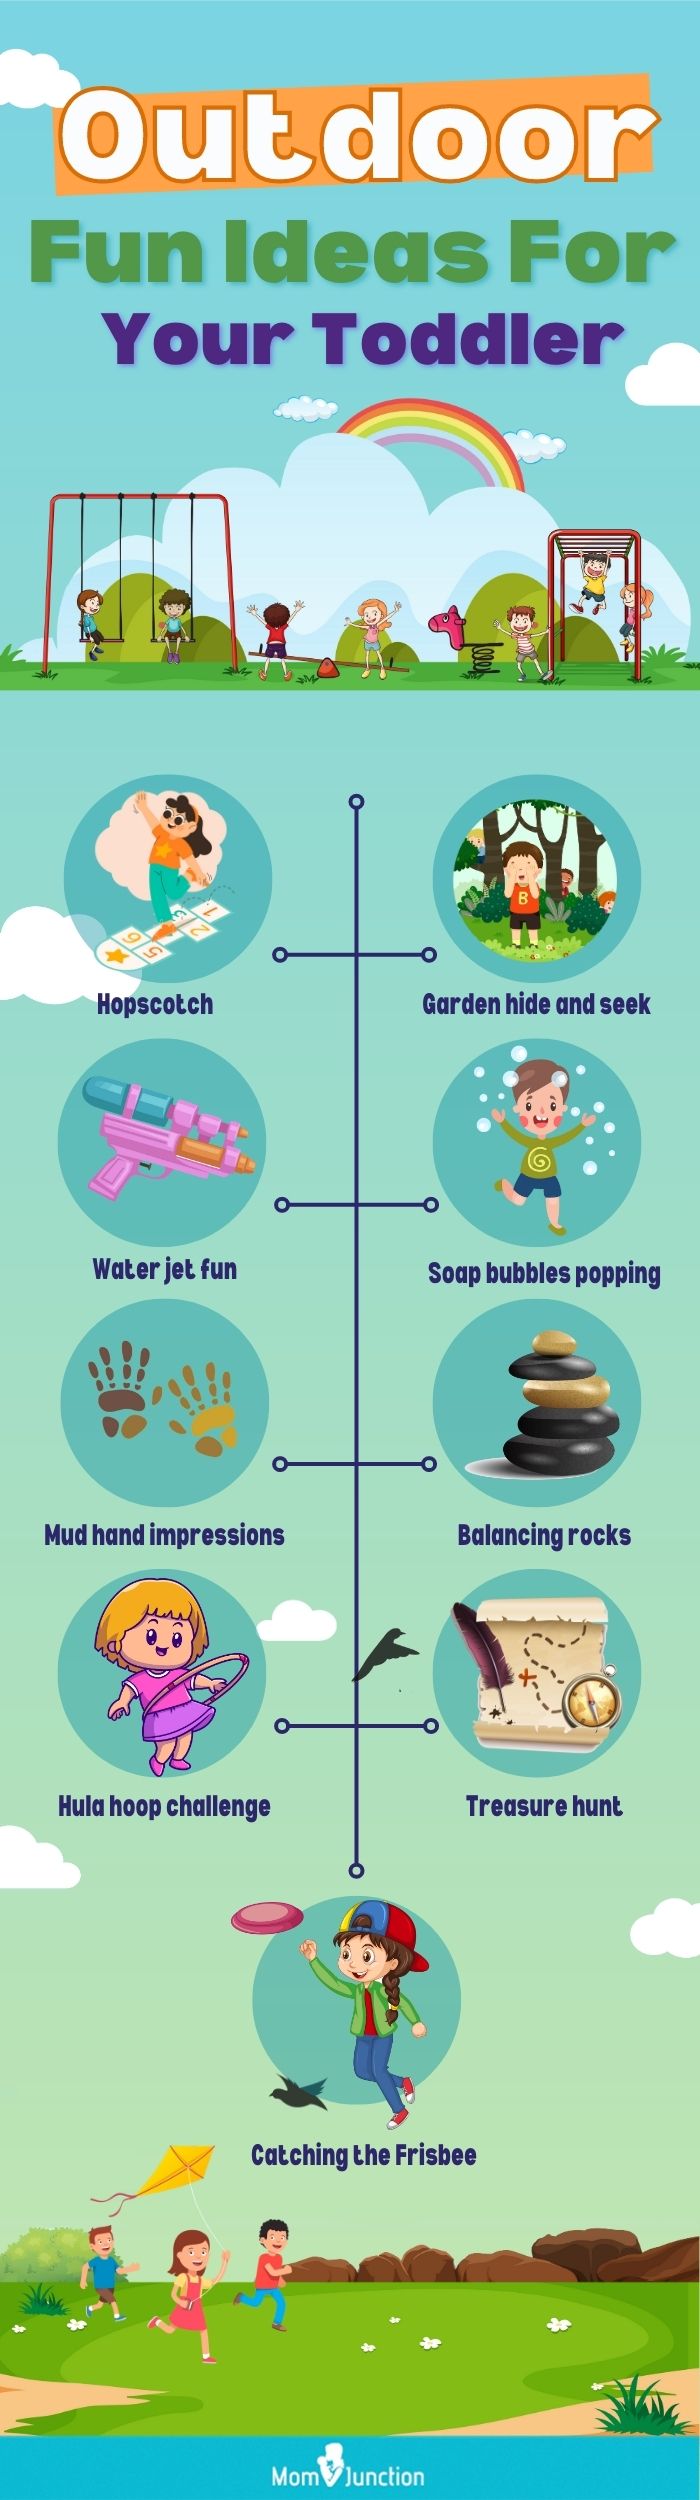 outdoor fun ideas for your toddler (infographic)